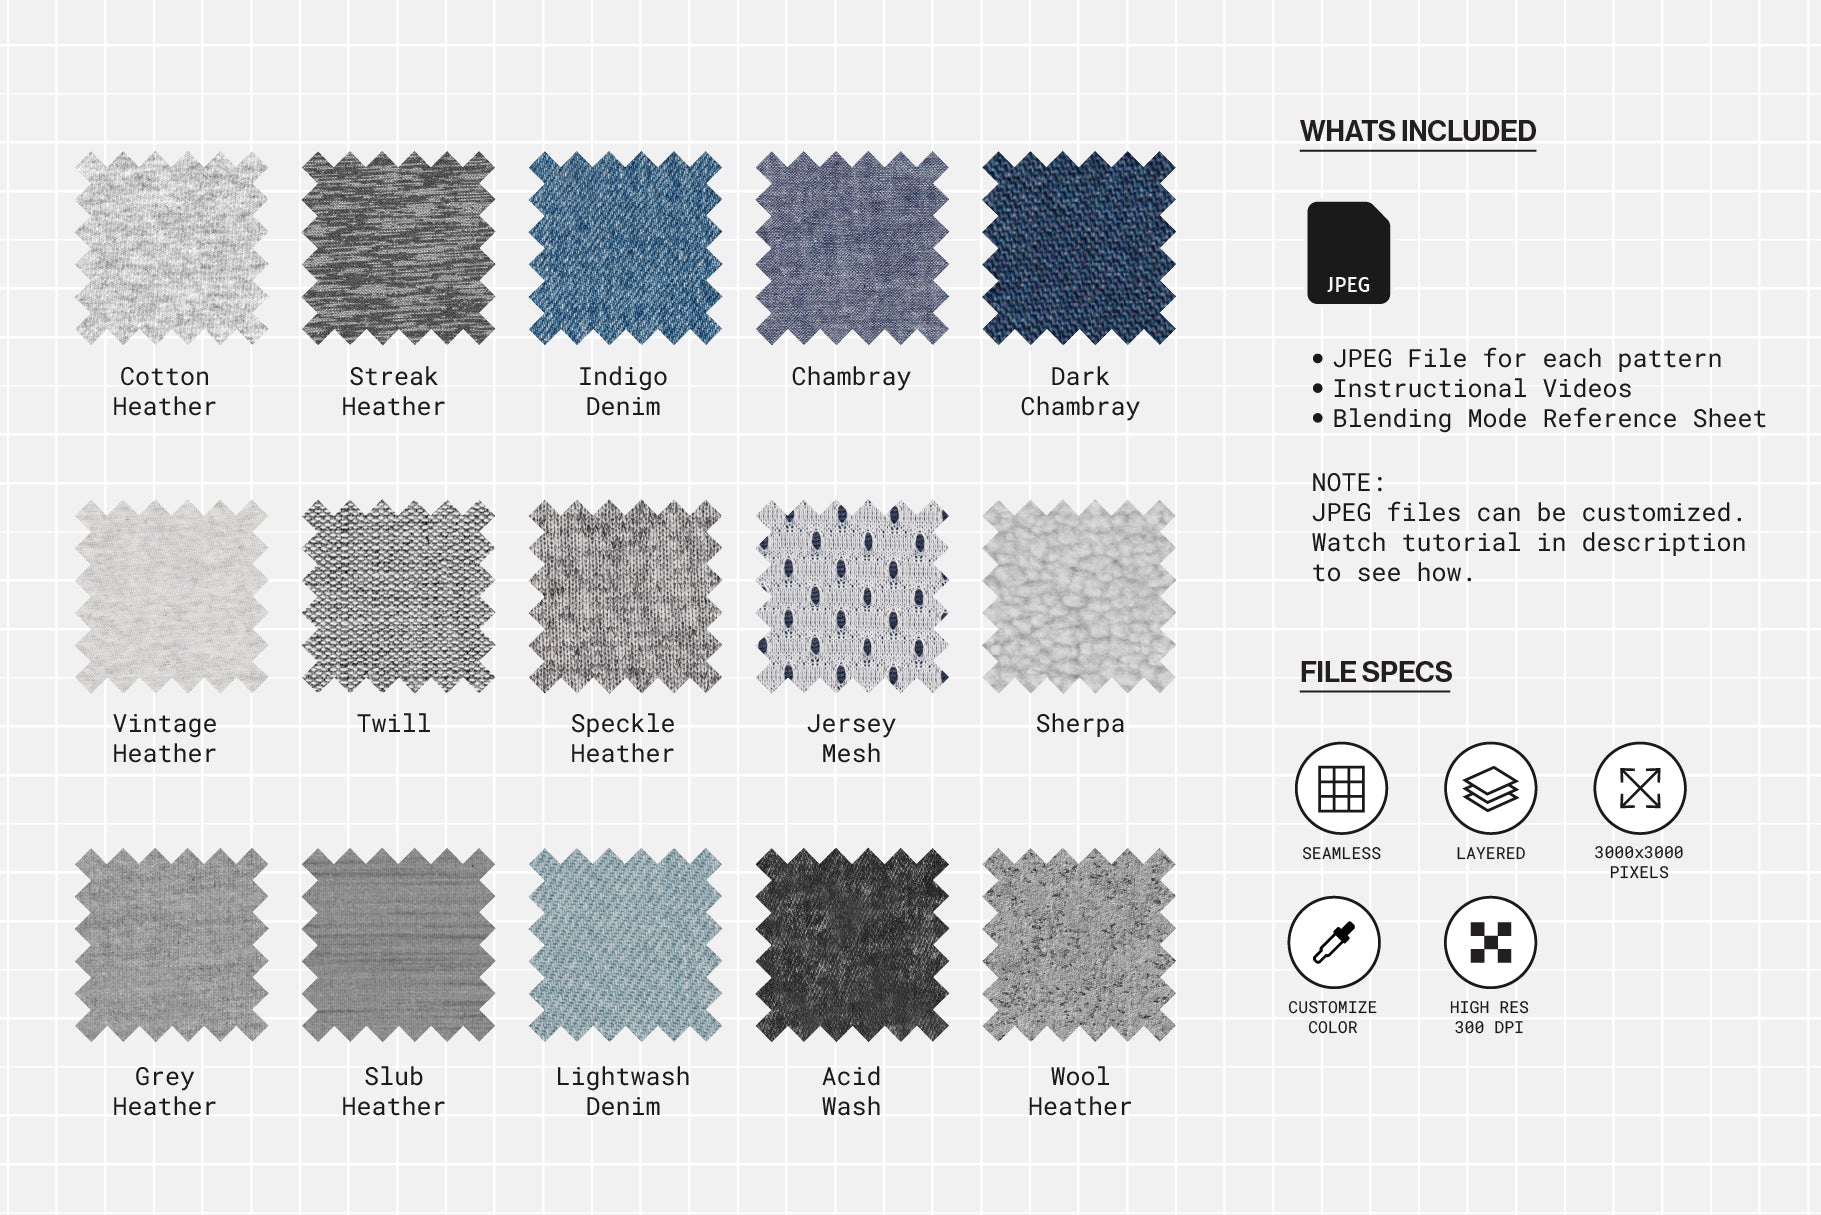 15 Pack Fabric Textures